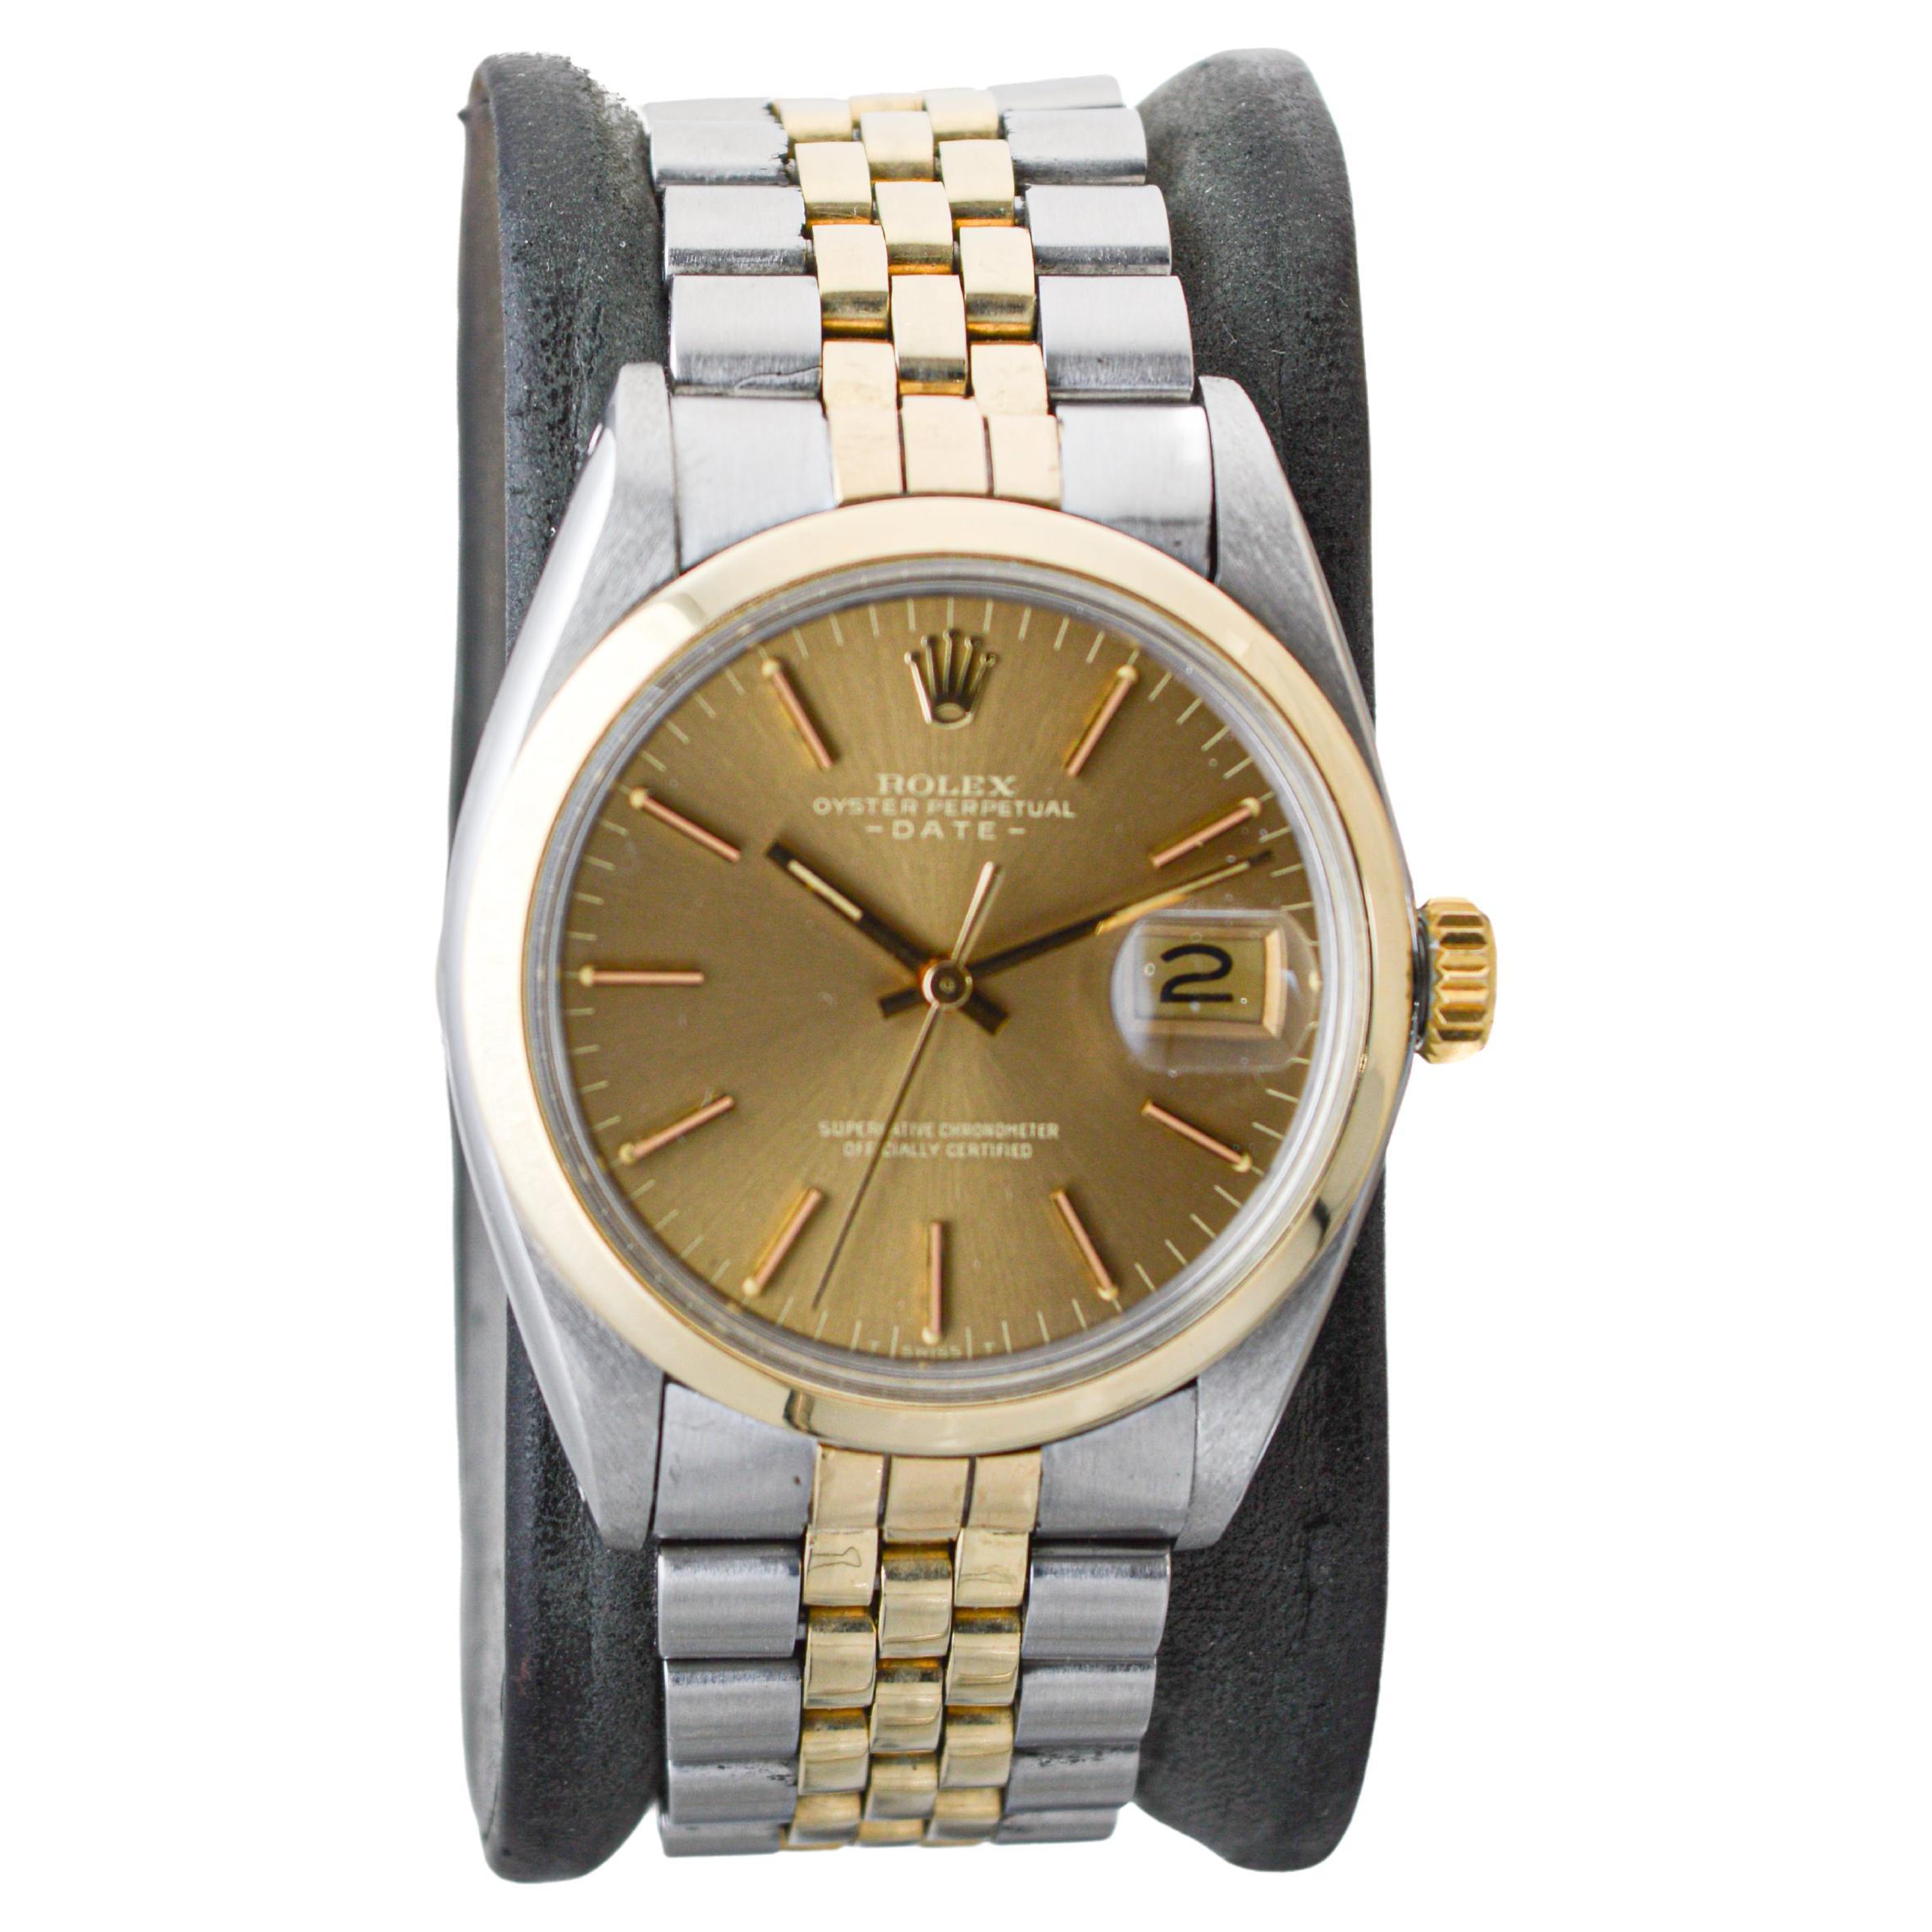 FACTORY / HOUSE: Rolex Watch Company
STYLE / REFERENCE: Oyster Perpetual Date / Reference 1500
METAL / MATERIAL: Two Tone 14Kt. & Stainless Steel 
CIRCA / YEAR: 1969
DIMENSIONS / SIZE: Length 43mm X Diameter 35mm
MOVEMENT / CALIBER: Perpetual